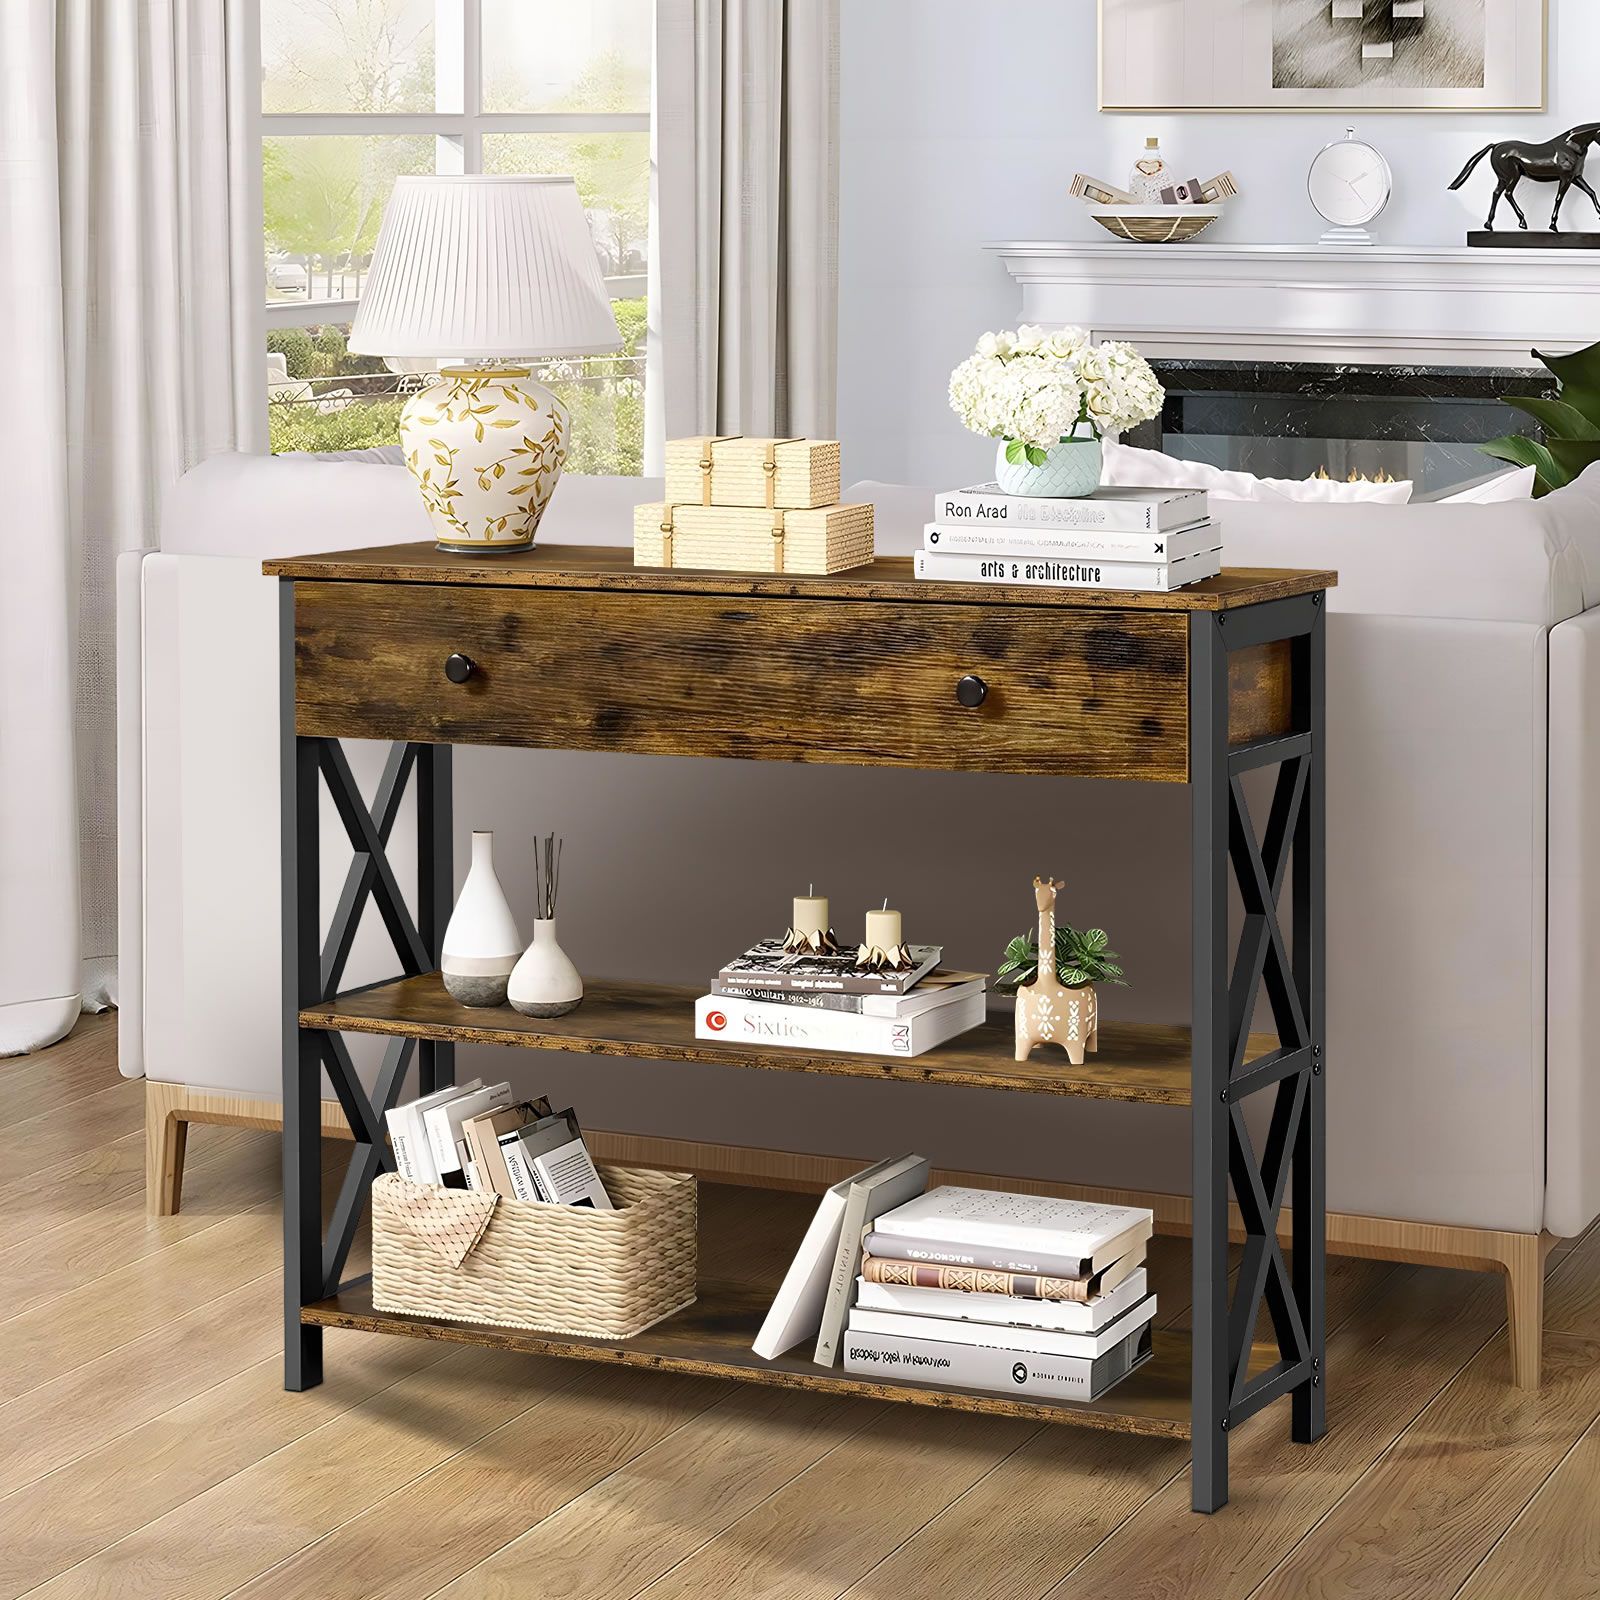 Industrial Console Table with Drawer Hall Entryway Bar Side Sofa Wooden Accent Couch Lamp Storage Shelf Display 100x30x80cm